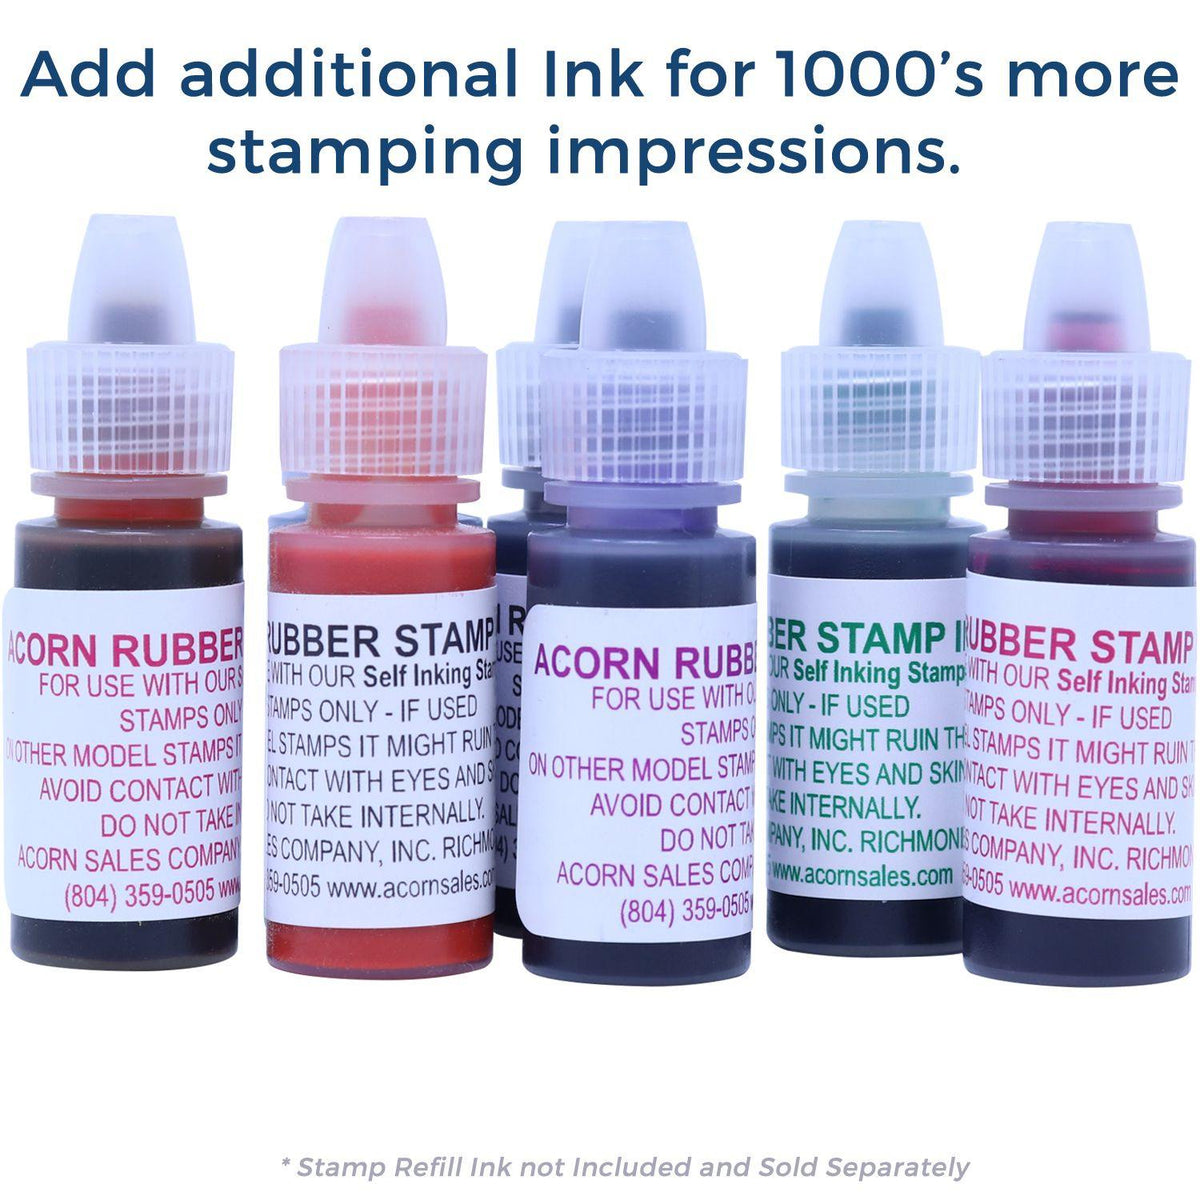 Refill Inks for Large Pre-Inked Confirmation of Phone Order Stamp Available